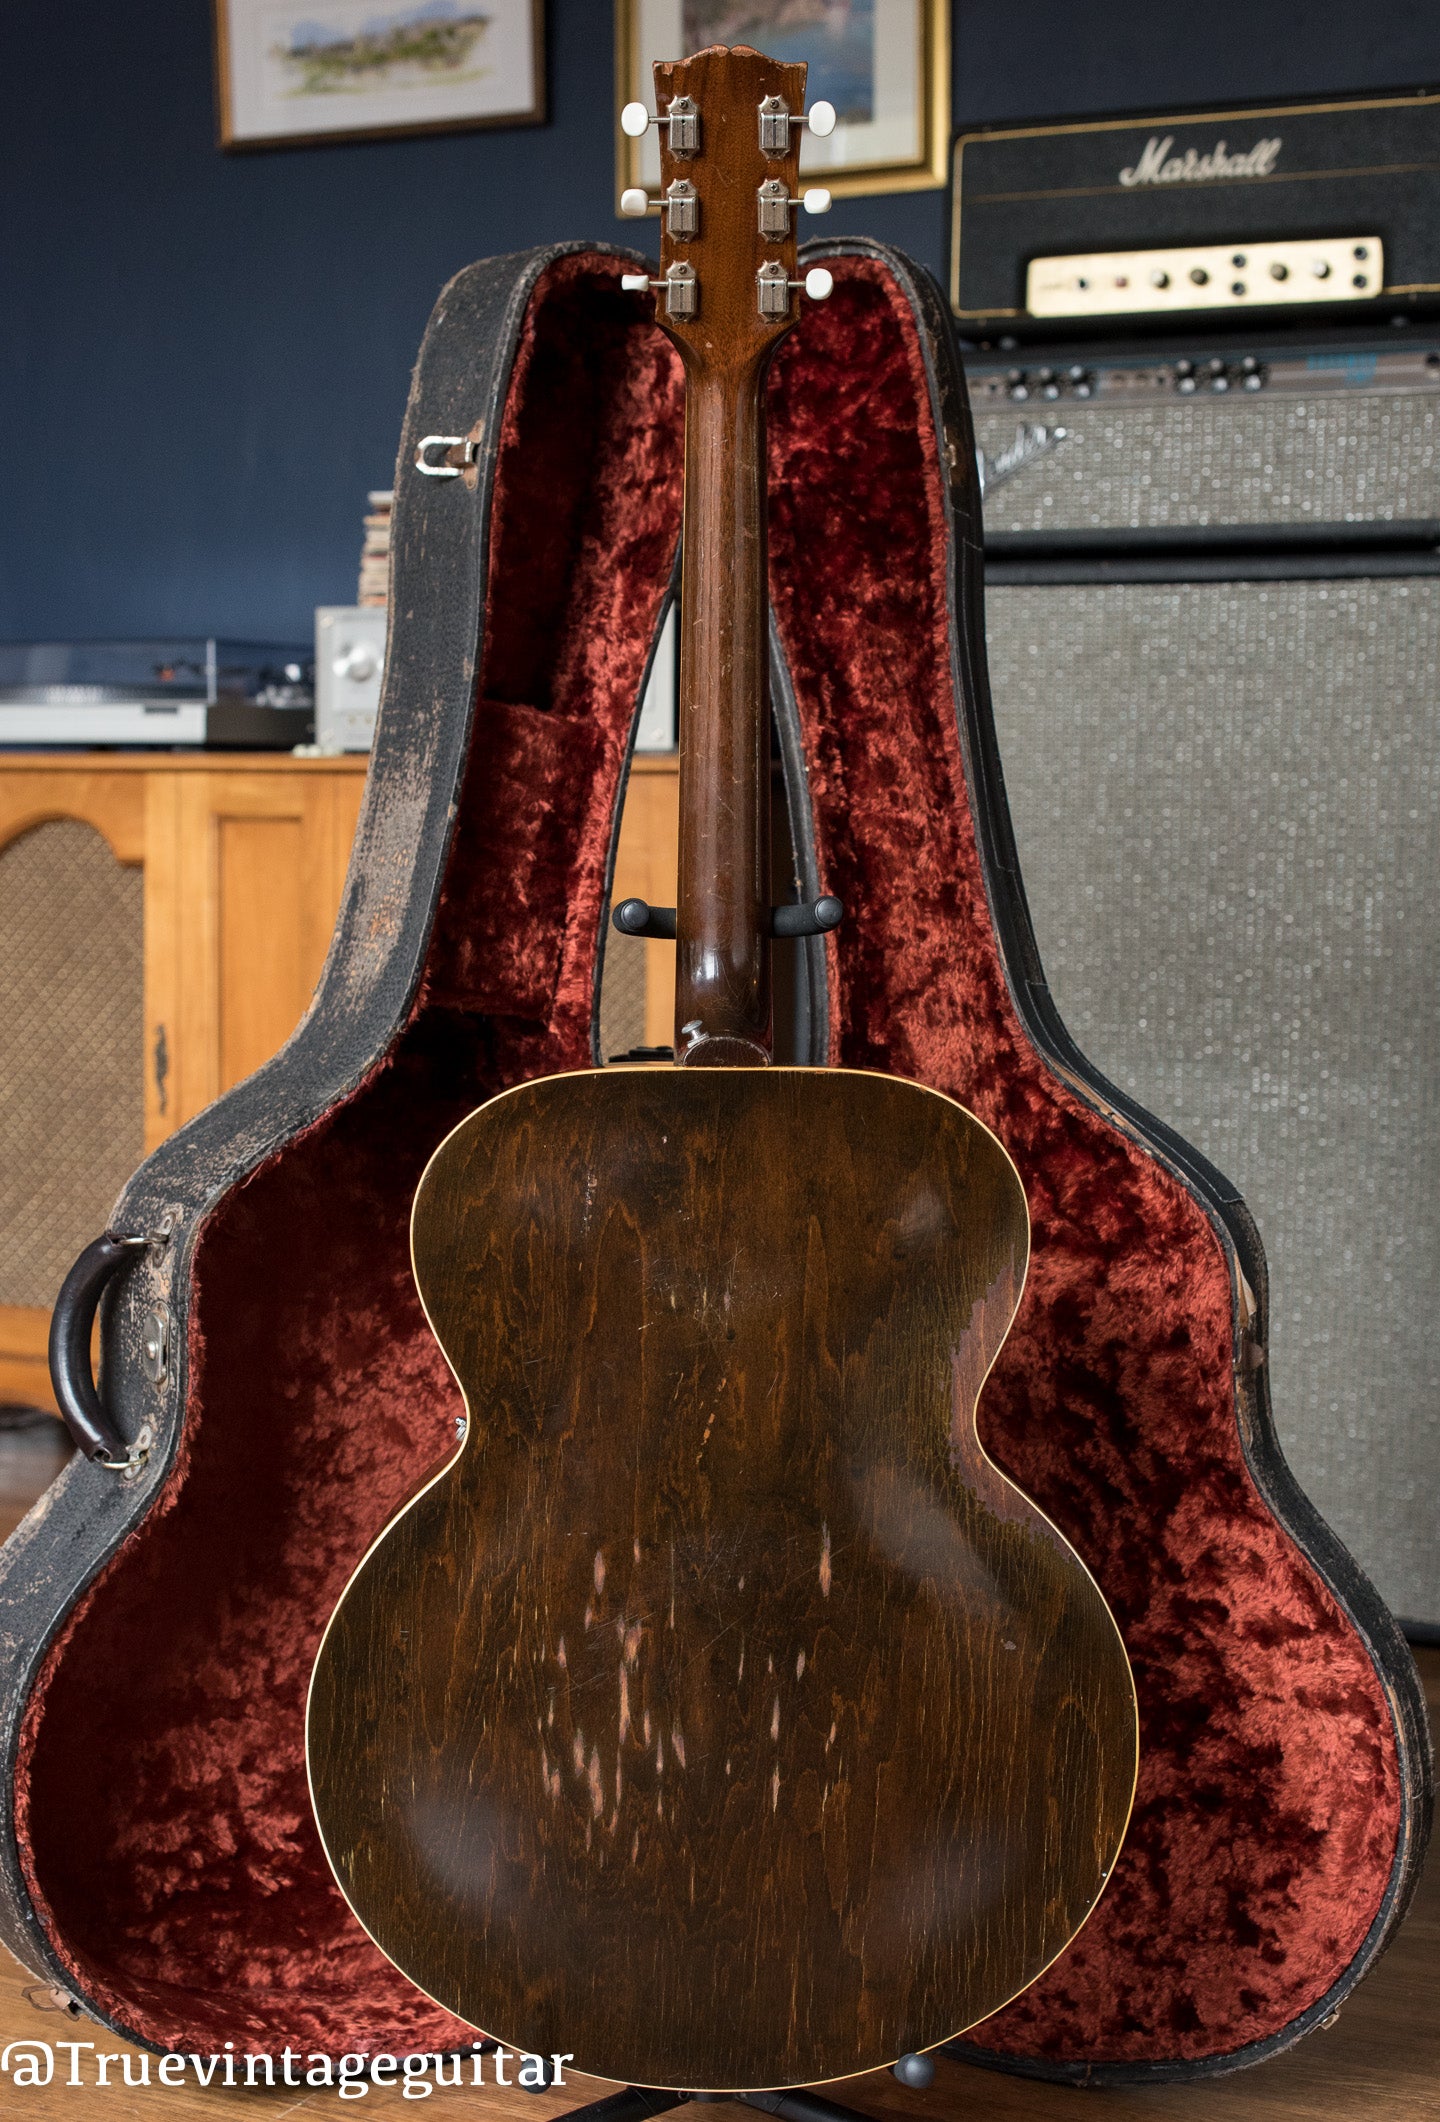 1955 Gibson ES-150 archtop electric guitar